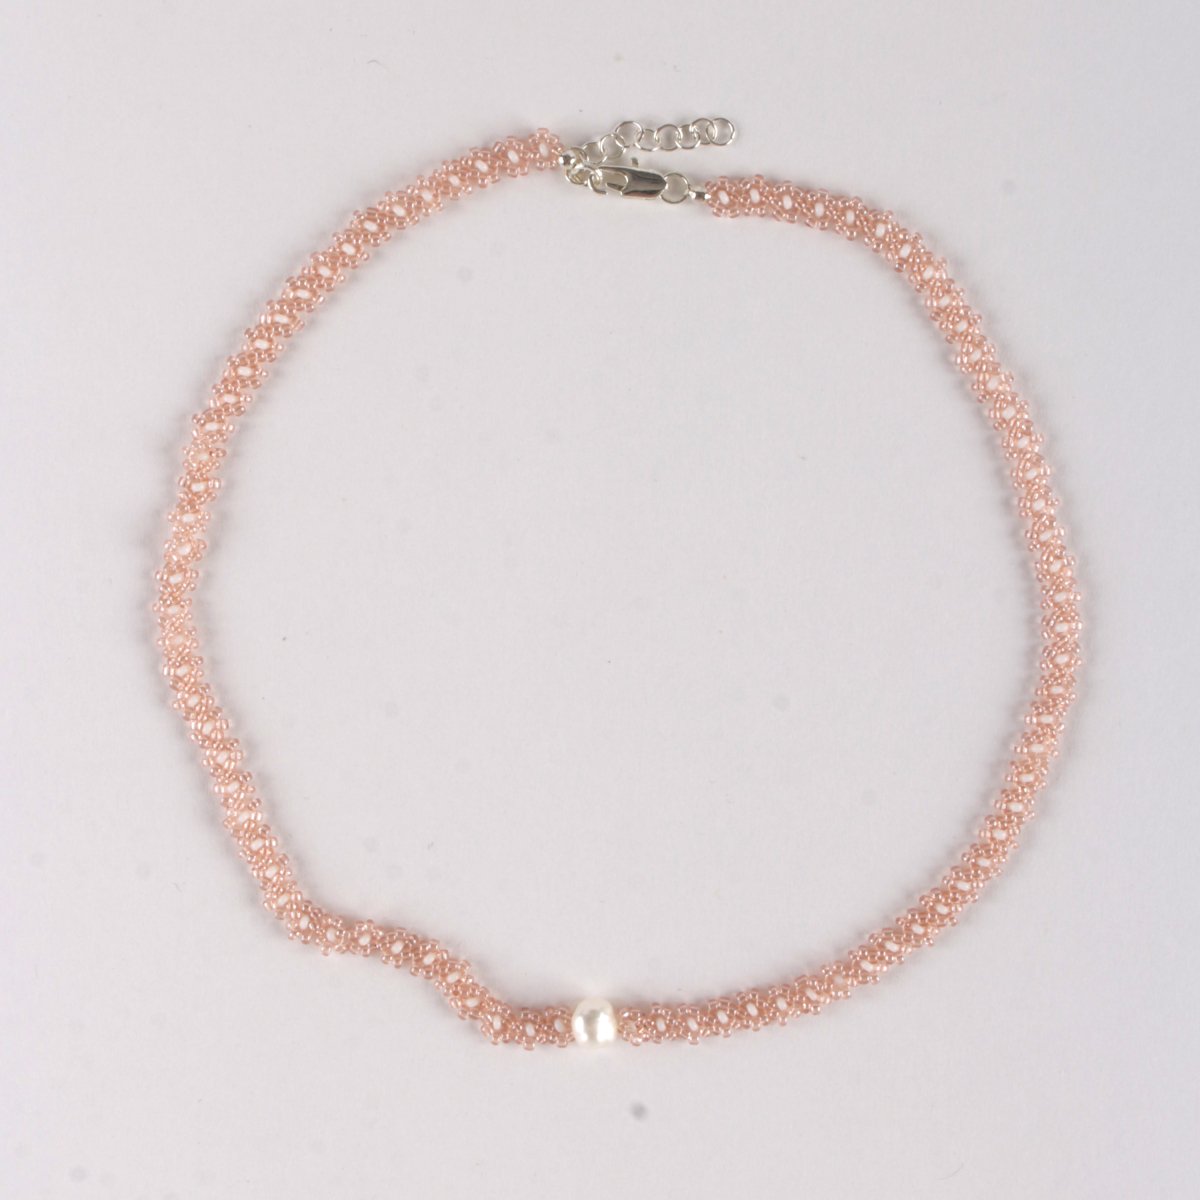 Daisy Chain in Pink